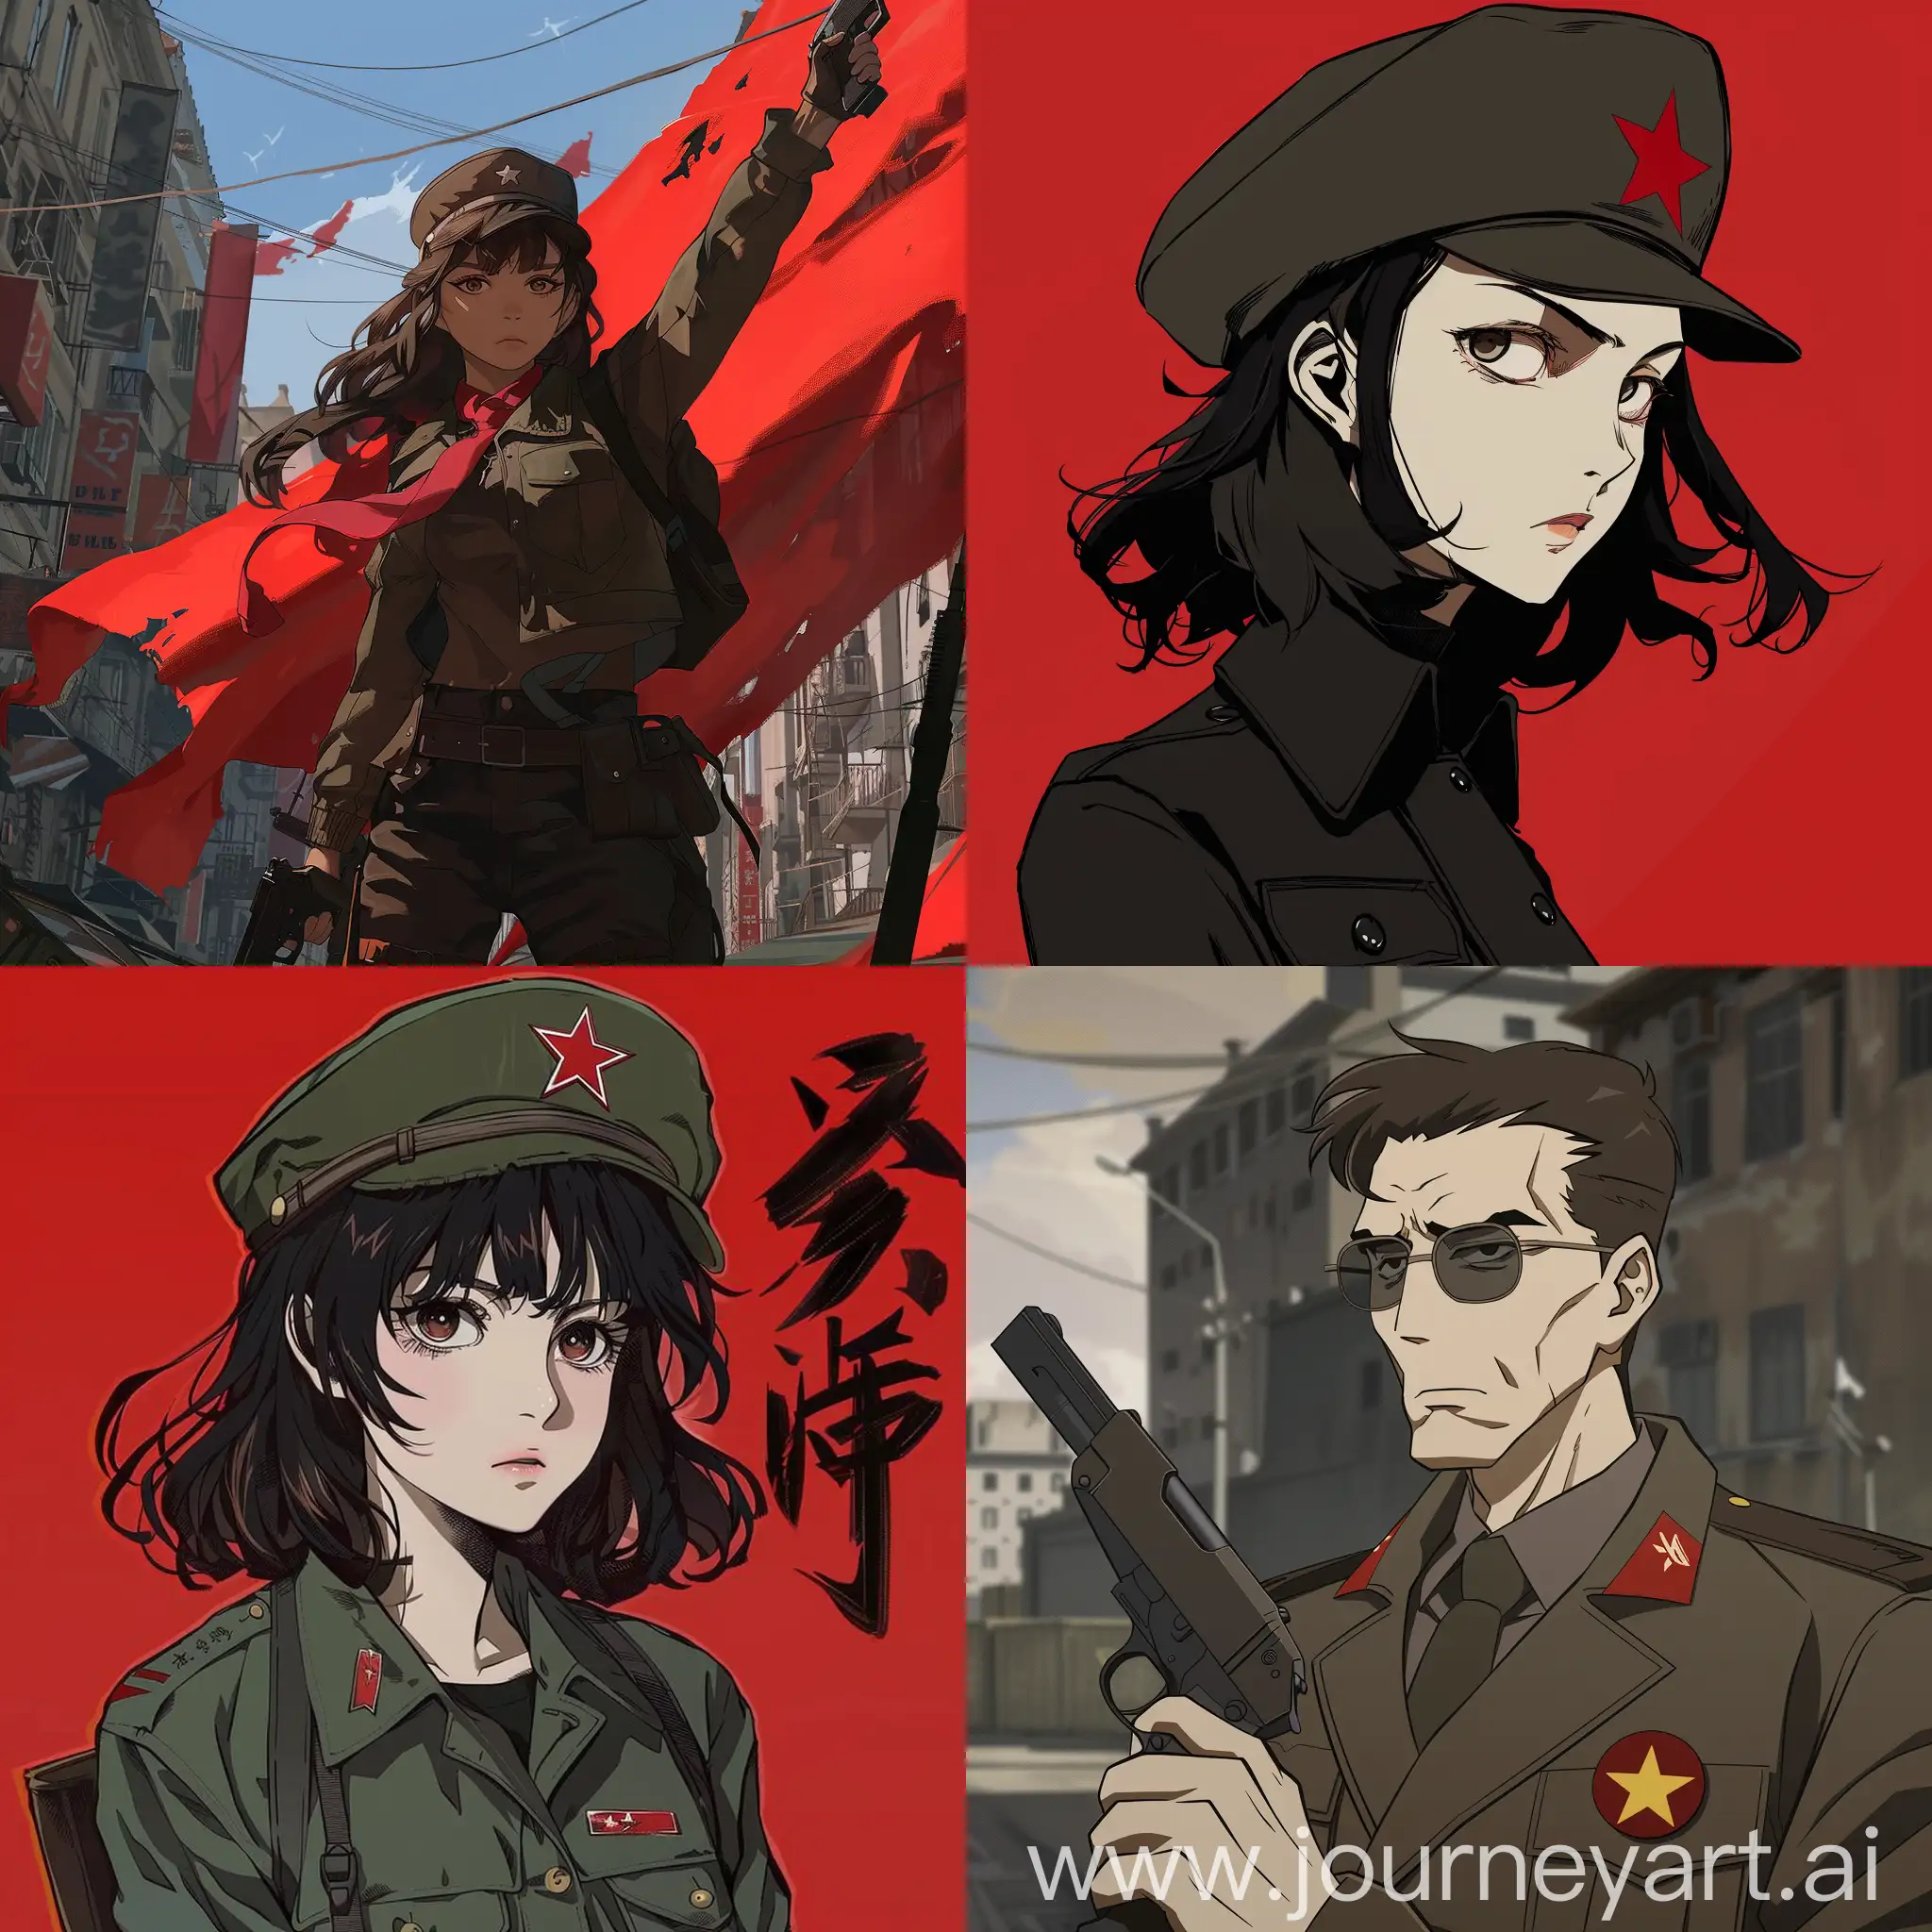 Proletarian in anime style